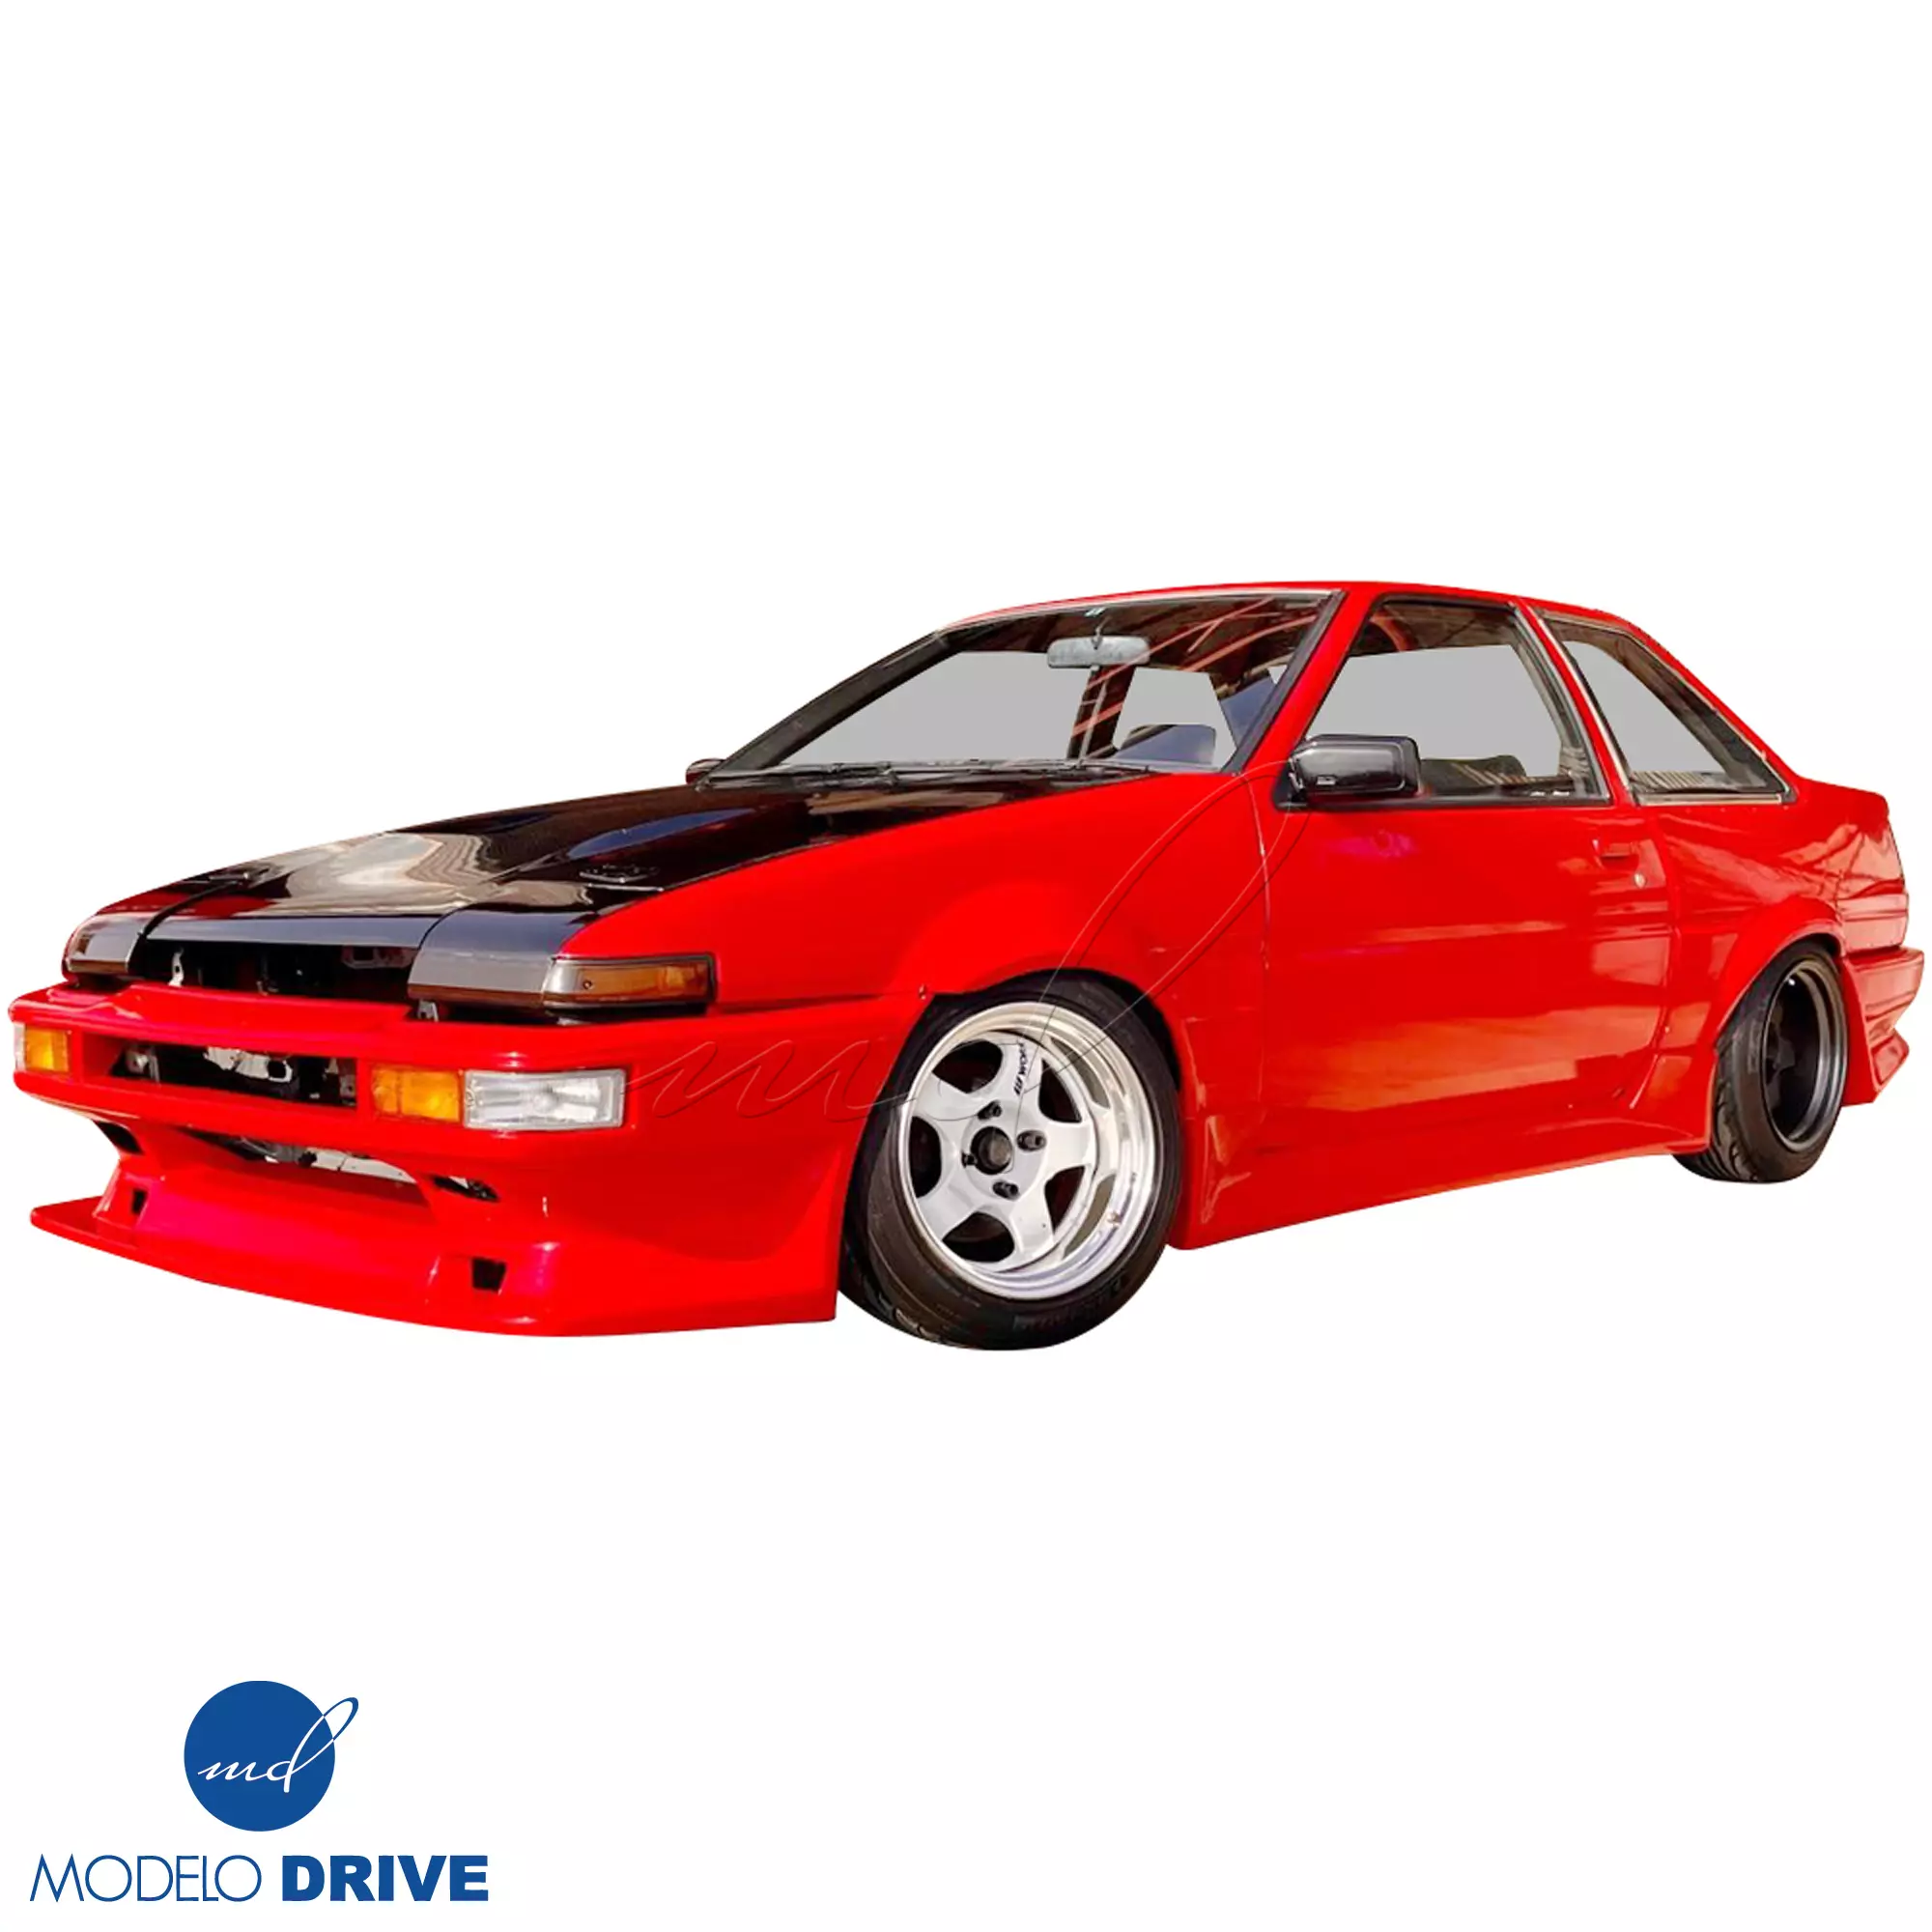 ModeloDrive FRP DMA D1 Wide Body 30mm Fenders Set > Toyota Corolla AE86 1984-1987 > 2dr Coupe - Image 54